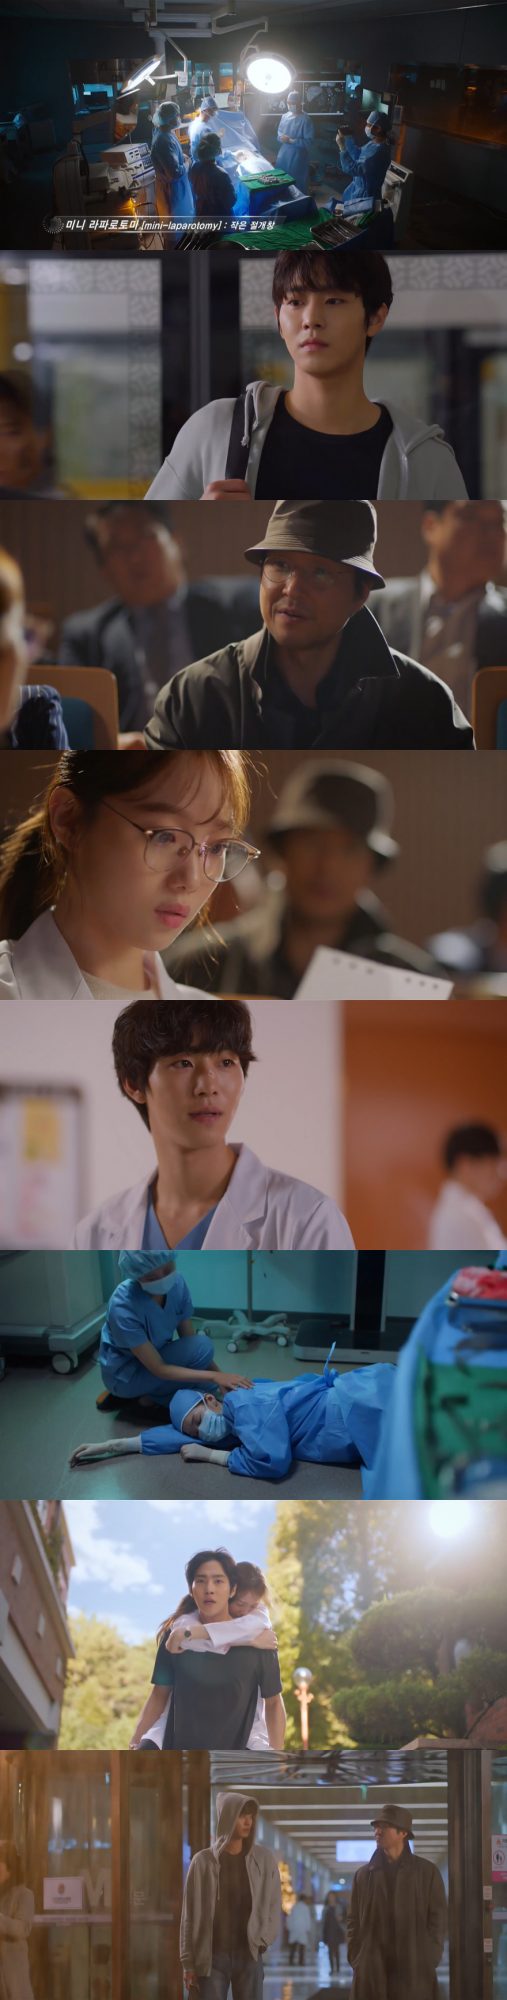 SBSs Romantic Doctor Kim Sabu returned to season 2 after three years, and Kim Sabu (Han Suk-kyu), who showed his mission as a doctor and the romance of seclusion with his whole body, remained the same.The characters who joined the new season, Ahn Hyo-seop, Lee Sung-kyung, Shin Dong-wook and So Ju-yeon, stimulated the curiosity about what story they would have.The behind-the-scenes story related to Kim Sabu, who injured his wrist in Season 1, is also expected to be revealed.The first episode of Romantic Doctor Kim Sabu 2 was broadcast on the 6th.The process of Seo Woo Jin (Ahn Hyo-seop), Cha Eun-jae (Lee Sung-kyung) and Yoon A-rum (Sho Ju-yeon) coming to Doldam Hospital was introduced.Young doctors Kang Dong-ju (Yoo Yeon-seok), Yoon Seo-jung (Seo Hyun-jin), and Do In-bum (Yang Se-jong), who worked at Doldam Hospital, left the hospital for public health work, overseas training, and return to the hospital.Kim, who had been working for several months, went to the main hospital of Geosan University Hospital to urge the recruitment of personnel.In the seminar room of the hospital, there was a demonstration of surgery by Professor Park Min-guk (Kim Joo-heon) through the screen.When an emergency occurred during the operation, Kim asked Cha Eun-jae, who was sitting in the front seat, to deliver something to the operating room by handing something down.Thanks to Kim Sabu, the emergency situation was completed, and Cha Eun-jae admired the ability of the person who handed him the note and wondered about the identity.After that, Kim Sabu neatly organized the emergency room where emergency patients followed. Yoon, who majored in emergency medicine, admired Kim Sabus appearance in the fourth year.Seo Woo Jin was shot with The Whistleblower at a hospital in Li Dian and bullied by colleagues.Since then, he has been working at Geosan University Hospital as a worker, but he is working part-time because he has difficulty in making a living.My colleagues at Geosan University Hospital did not like the Seo Woo Jin, who was The Whistleblower.Seo Woo Jin was furious at the words of a fellow fellow who was not working in a bar.Since then, Professor Park Min-guk has been asking Seo Woo Jin to quit as a doctor.Cha Eun-jae went into thoracic surgery and Seo Woo Jin went into surgery.In the operating room of Seo Woo Jin, a patient suffered a diaphragmatic bleeding, which required surgery and joint surgery, and Cha Eun-jae came in.Cha Eun-jae, who overdosed on a tranquilizer due to operating room swelling, fell asleep like a faint during surgery.Cha Eun-jae, who was disciplined, chose to work at Doldam Hospital during suspension and dispatch to Doldam Hospital.Kim, who learned about the situation of Seo Woo Jin, proposed a place for the surgery of the Doldam Hospital to Seo Woo Jin, who was leaving the office, and Seo Woo Jin came down to Doldam Hospital.Yoon Beautiful volunteered to dispatch a hospital to Doldam, while Kim Sabus wonderful side was his doctor. Do Yoon-wan (Choi Jin-ho), who left the hospital in disgrace, returned to the chairman of Doldam Hospital.Romantic Doctor Kim Sabu 2 created tension and curiosity as existing characters and new characters mix appropriately.In Season 1, the conflict between Kim Sabu and Do Yoon-wan was maximized, and this time, the confrontation between Kim Sabu and Park Min-guk, who will be appointed as vice president of Doldam Hospital, is expected to be more dramatic.In addition, young blood such as Ahn Hyo-seop, Lee Sung-kyung, Soju Yeon, Shin Dong-wook energized the drama.However, Lee Sung-kyung and Ahn Hyo-seop were evaluated as lacking acting ability or box office performance compared to Seo Hyun-jin and Yoo Yeon-seok of Season 1.However, as the characters in the play grow, there were many viewers who expected that the two characters expressions would become more natural.Ahn Hyo-seop and Lee Sung-kyung are rivals in the play, but they are also intertwined with romance lines. From the beginning, the opinions of viewers were divided in the foreshadowed romance.It was able to attract existing viewers who missed Romantic Doctor Kim Sabu while continuing the unique atmosphere of Season 1 to Season 2.However, the heroine with the swelling, the male protagonist who is chased by the Ushijima the Loan Shark vendors, was somewhat disappointing because it was a setting that I had seen many in Li Dian.Seo Woo Jin, who was beaten by Ushijima the Loan Shark vendors, came to Doldam Hospital with a scarred face and said to Kim Sabu, Do you want a job?I need money. How much can you give me? The childish ambassador also disturbed the atmosphere of the drama.